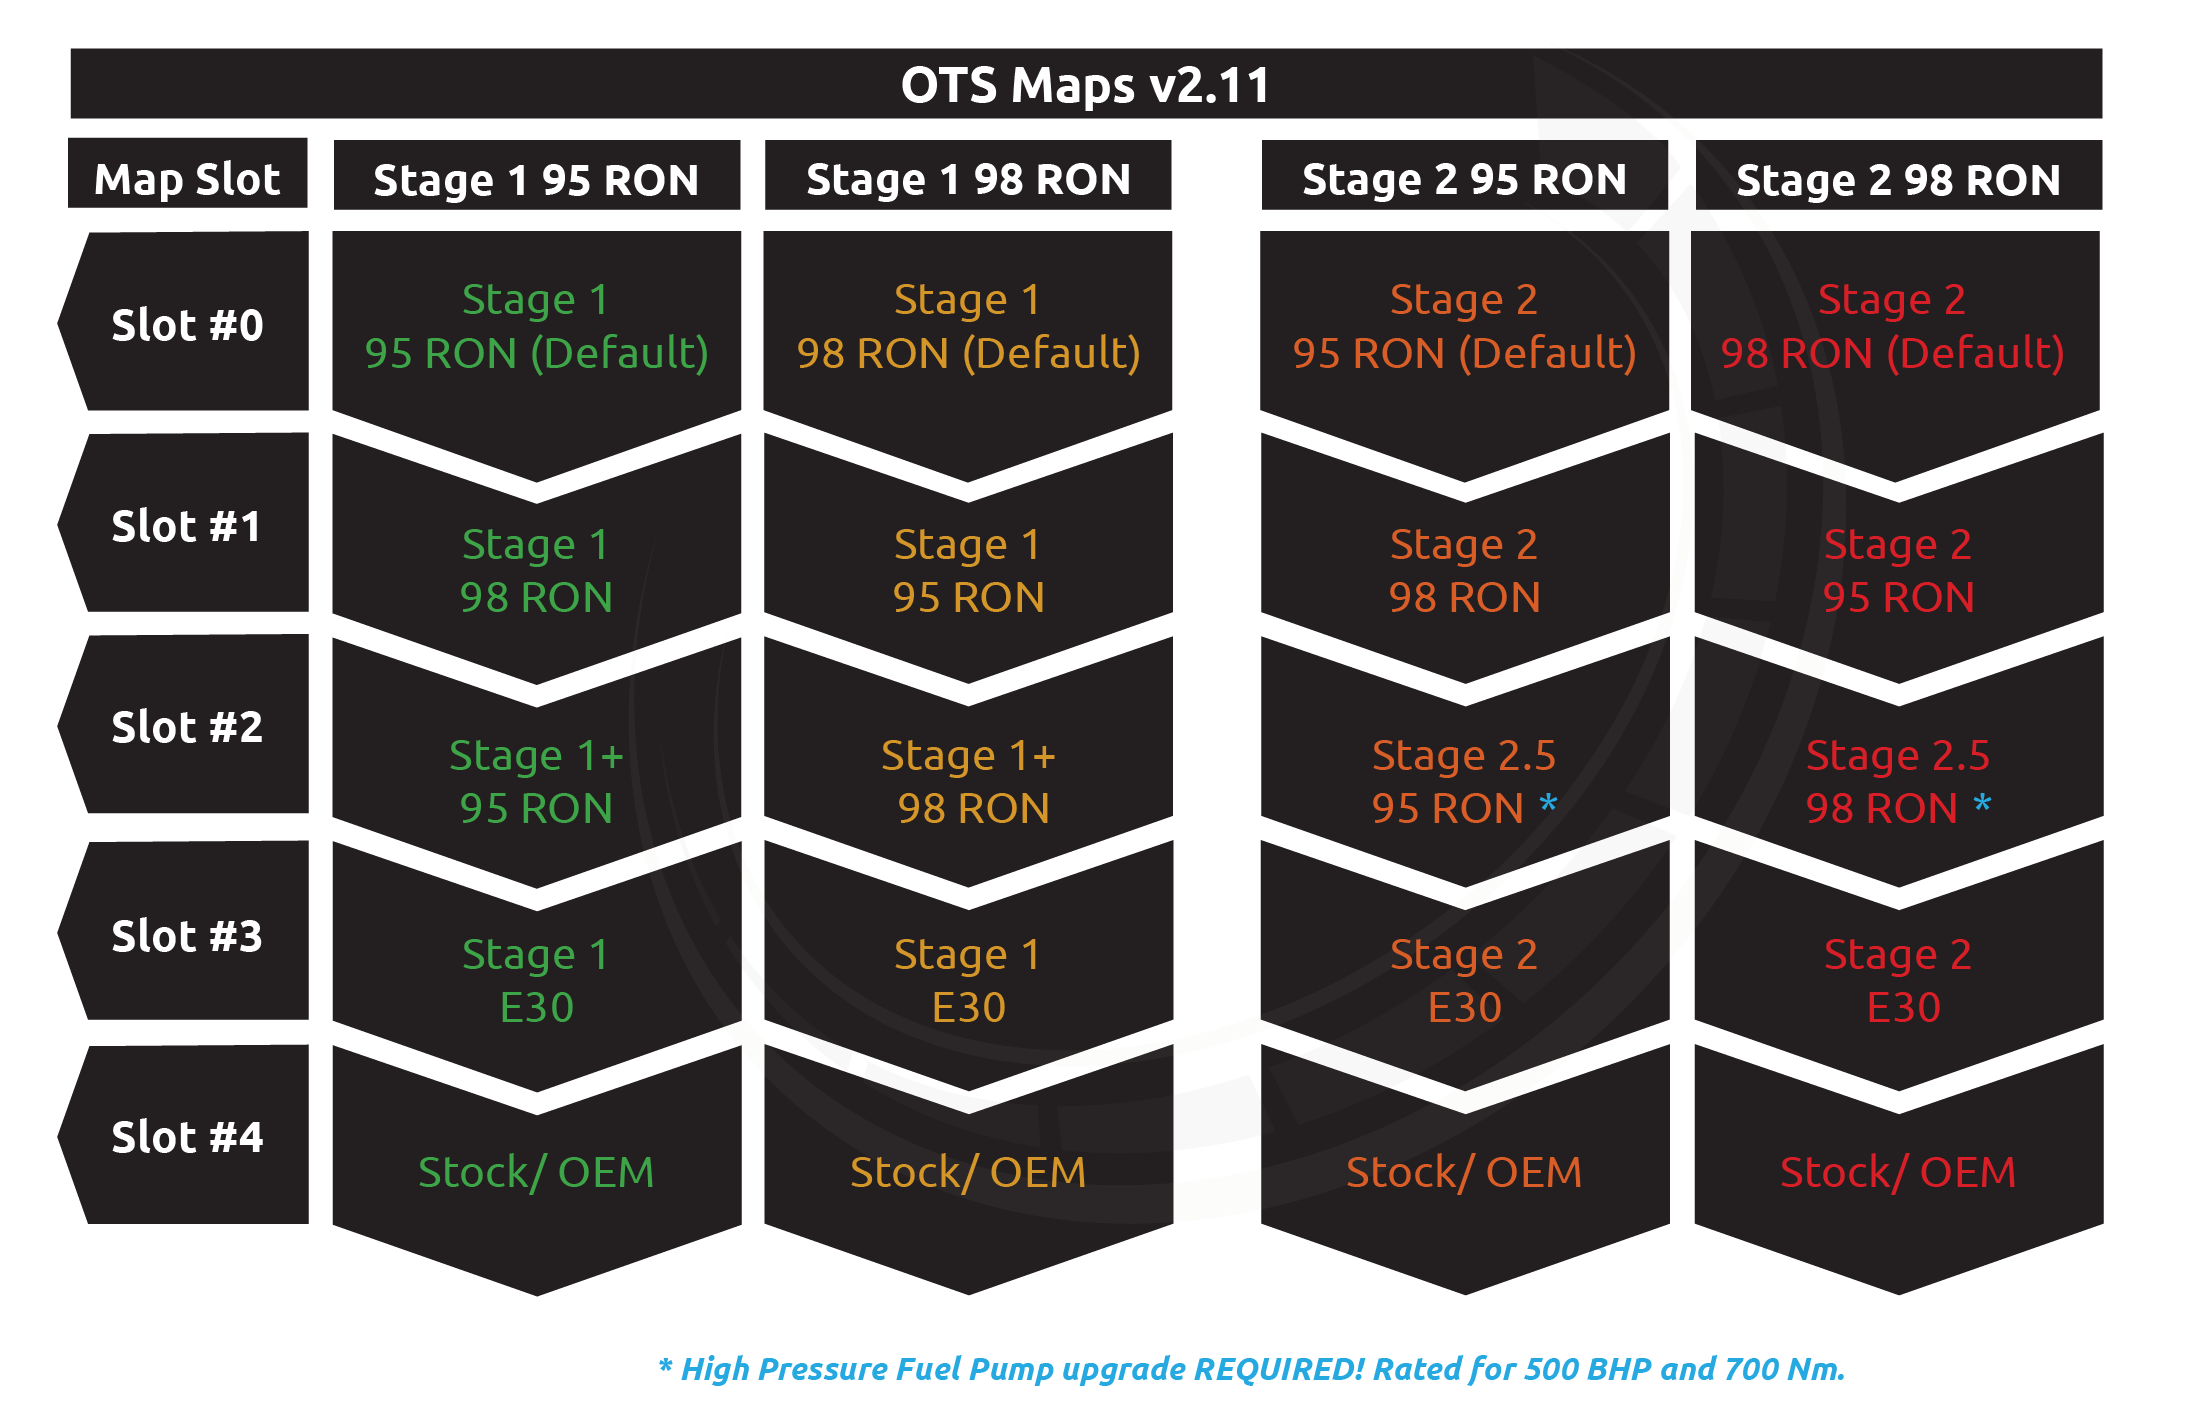 B58 Stage 1 and Stage 2 OTS Map v2.11 Slot Descriptions